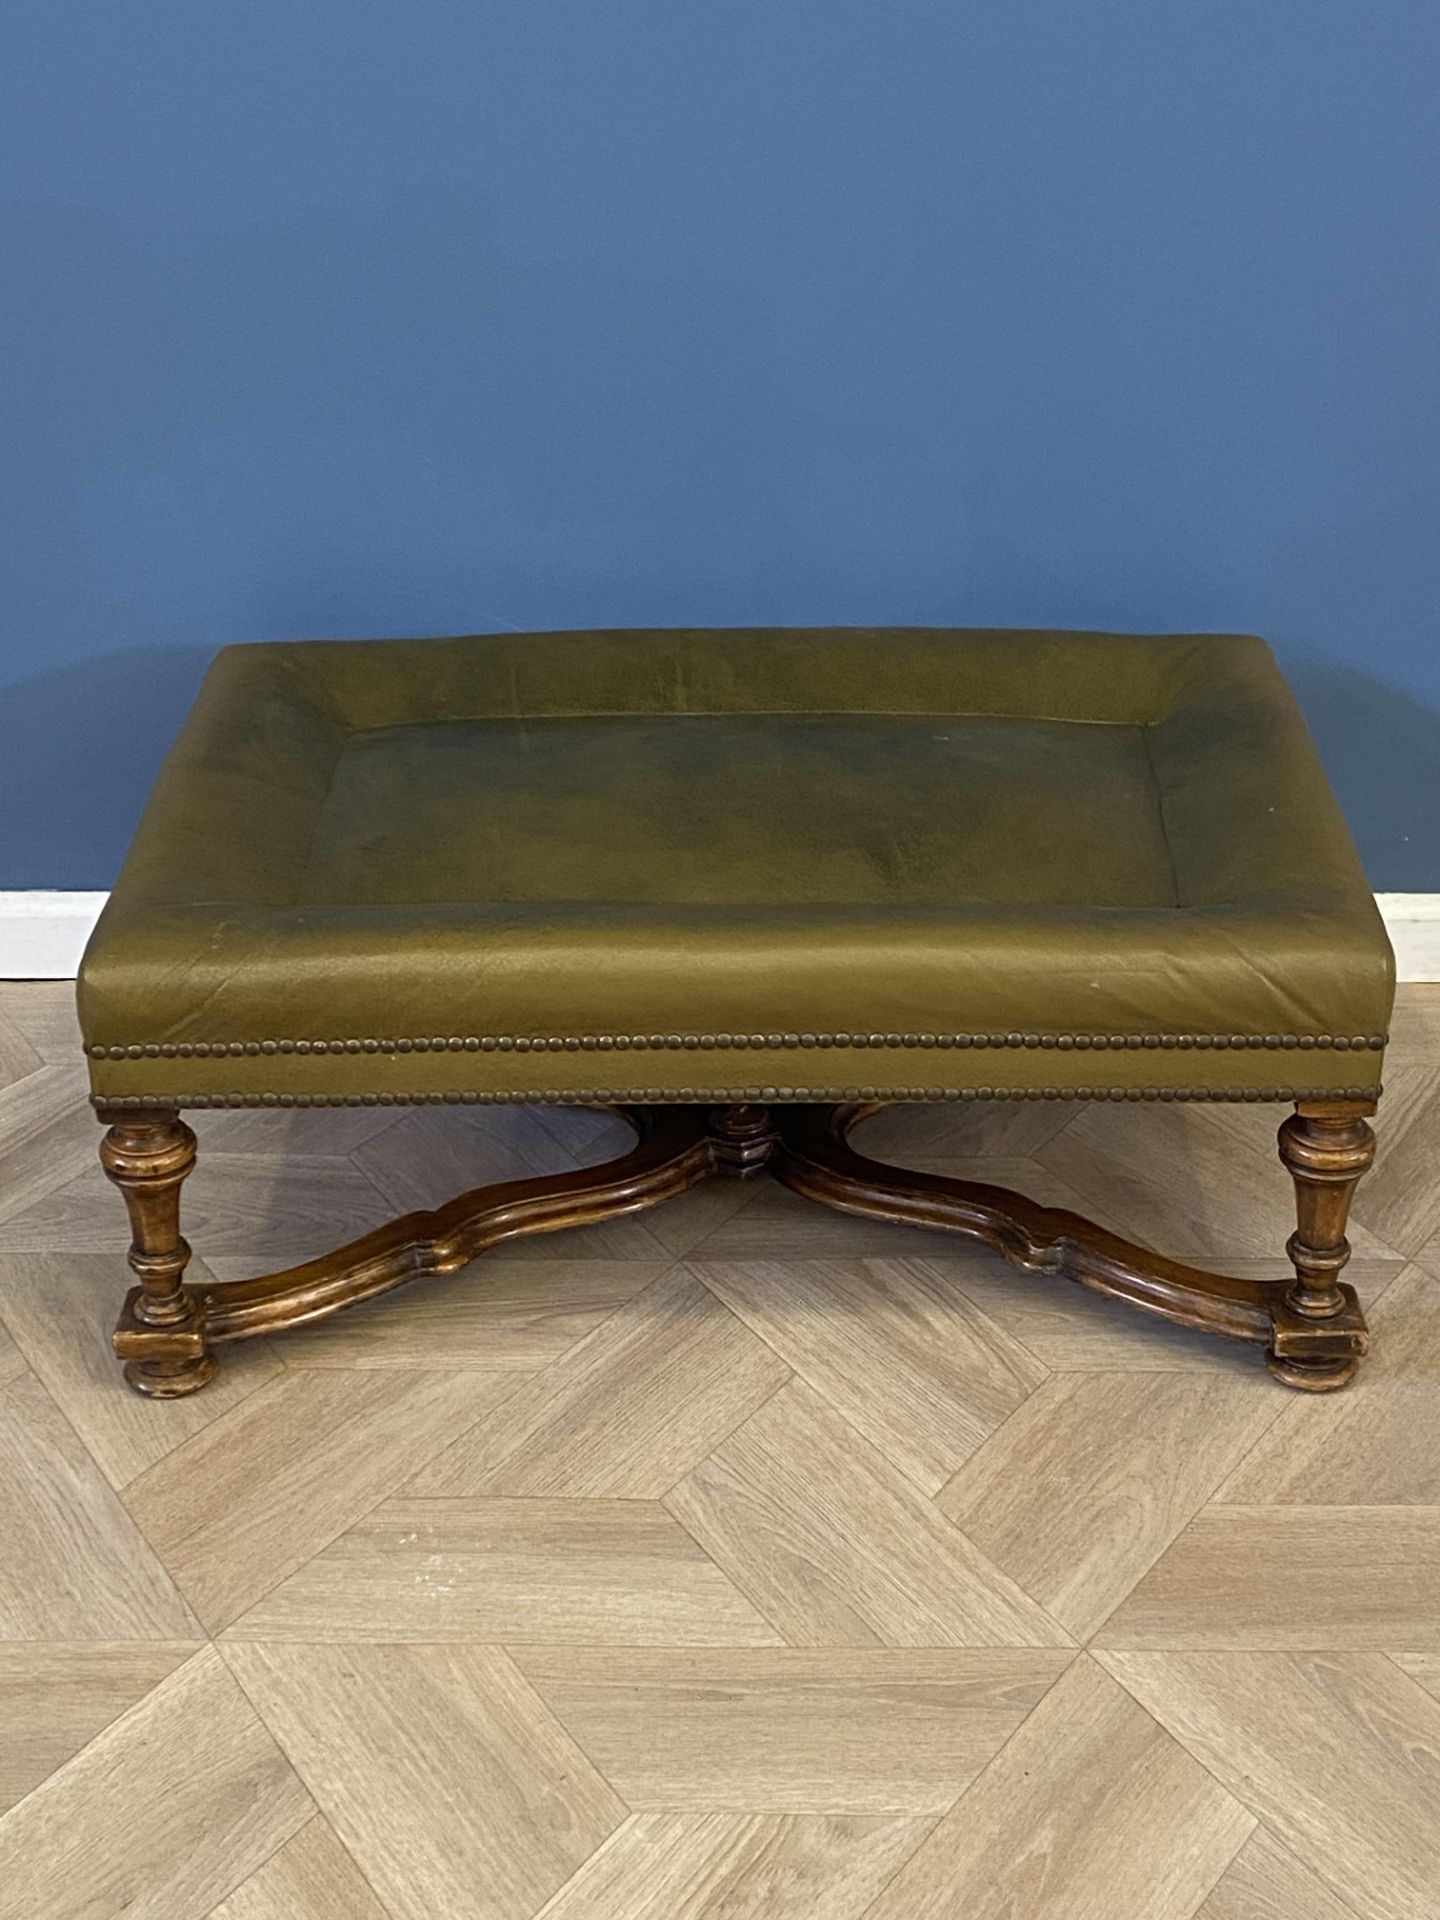 Green leather footstool